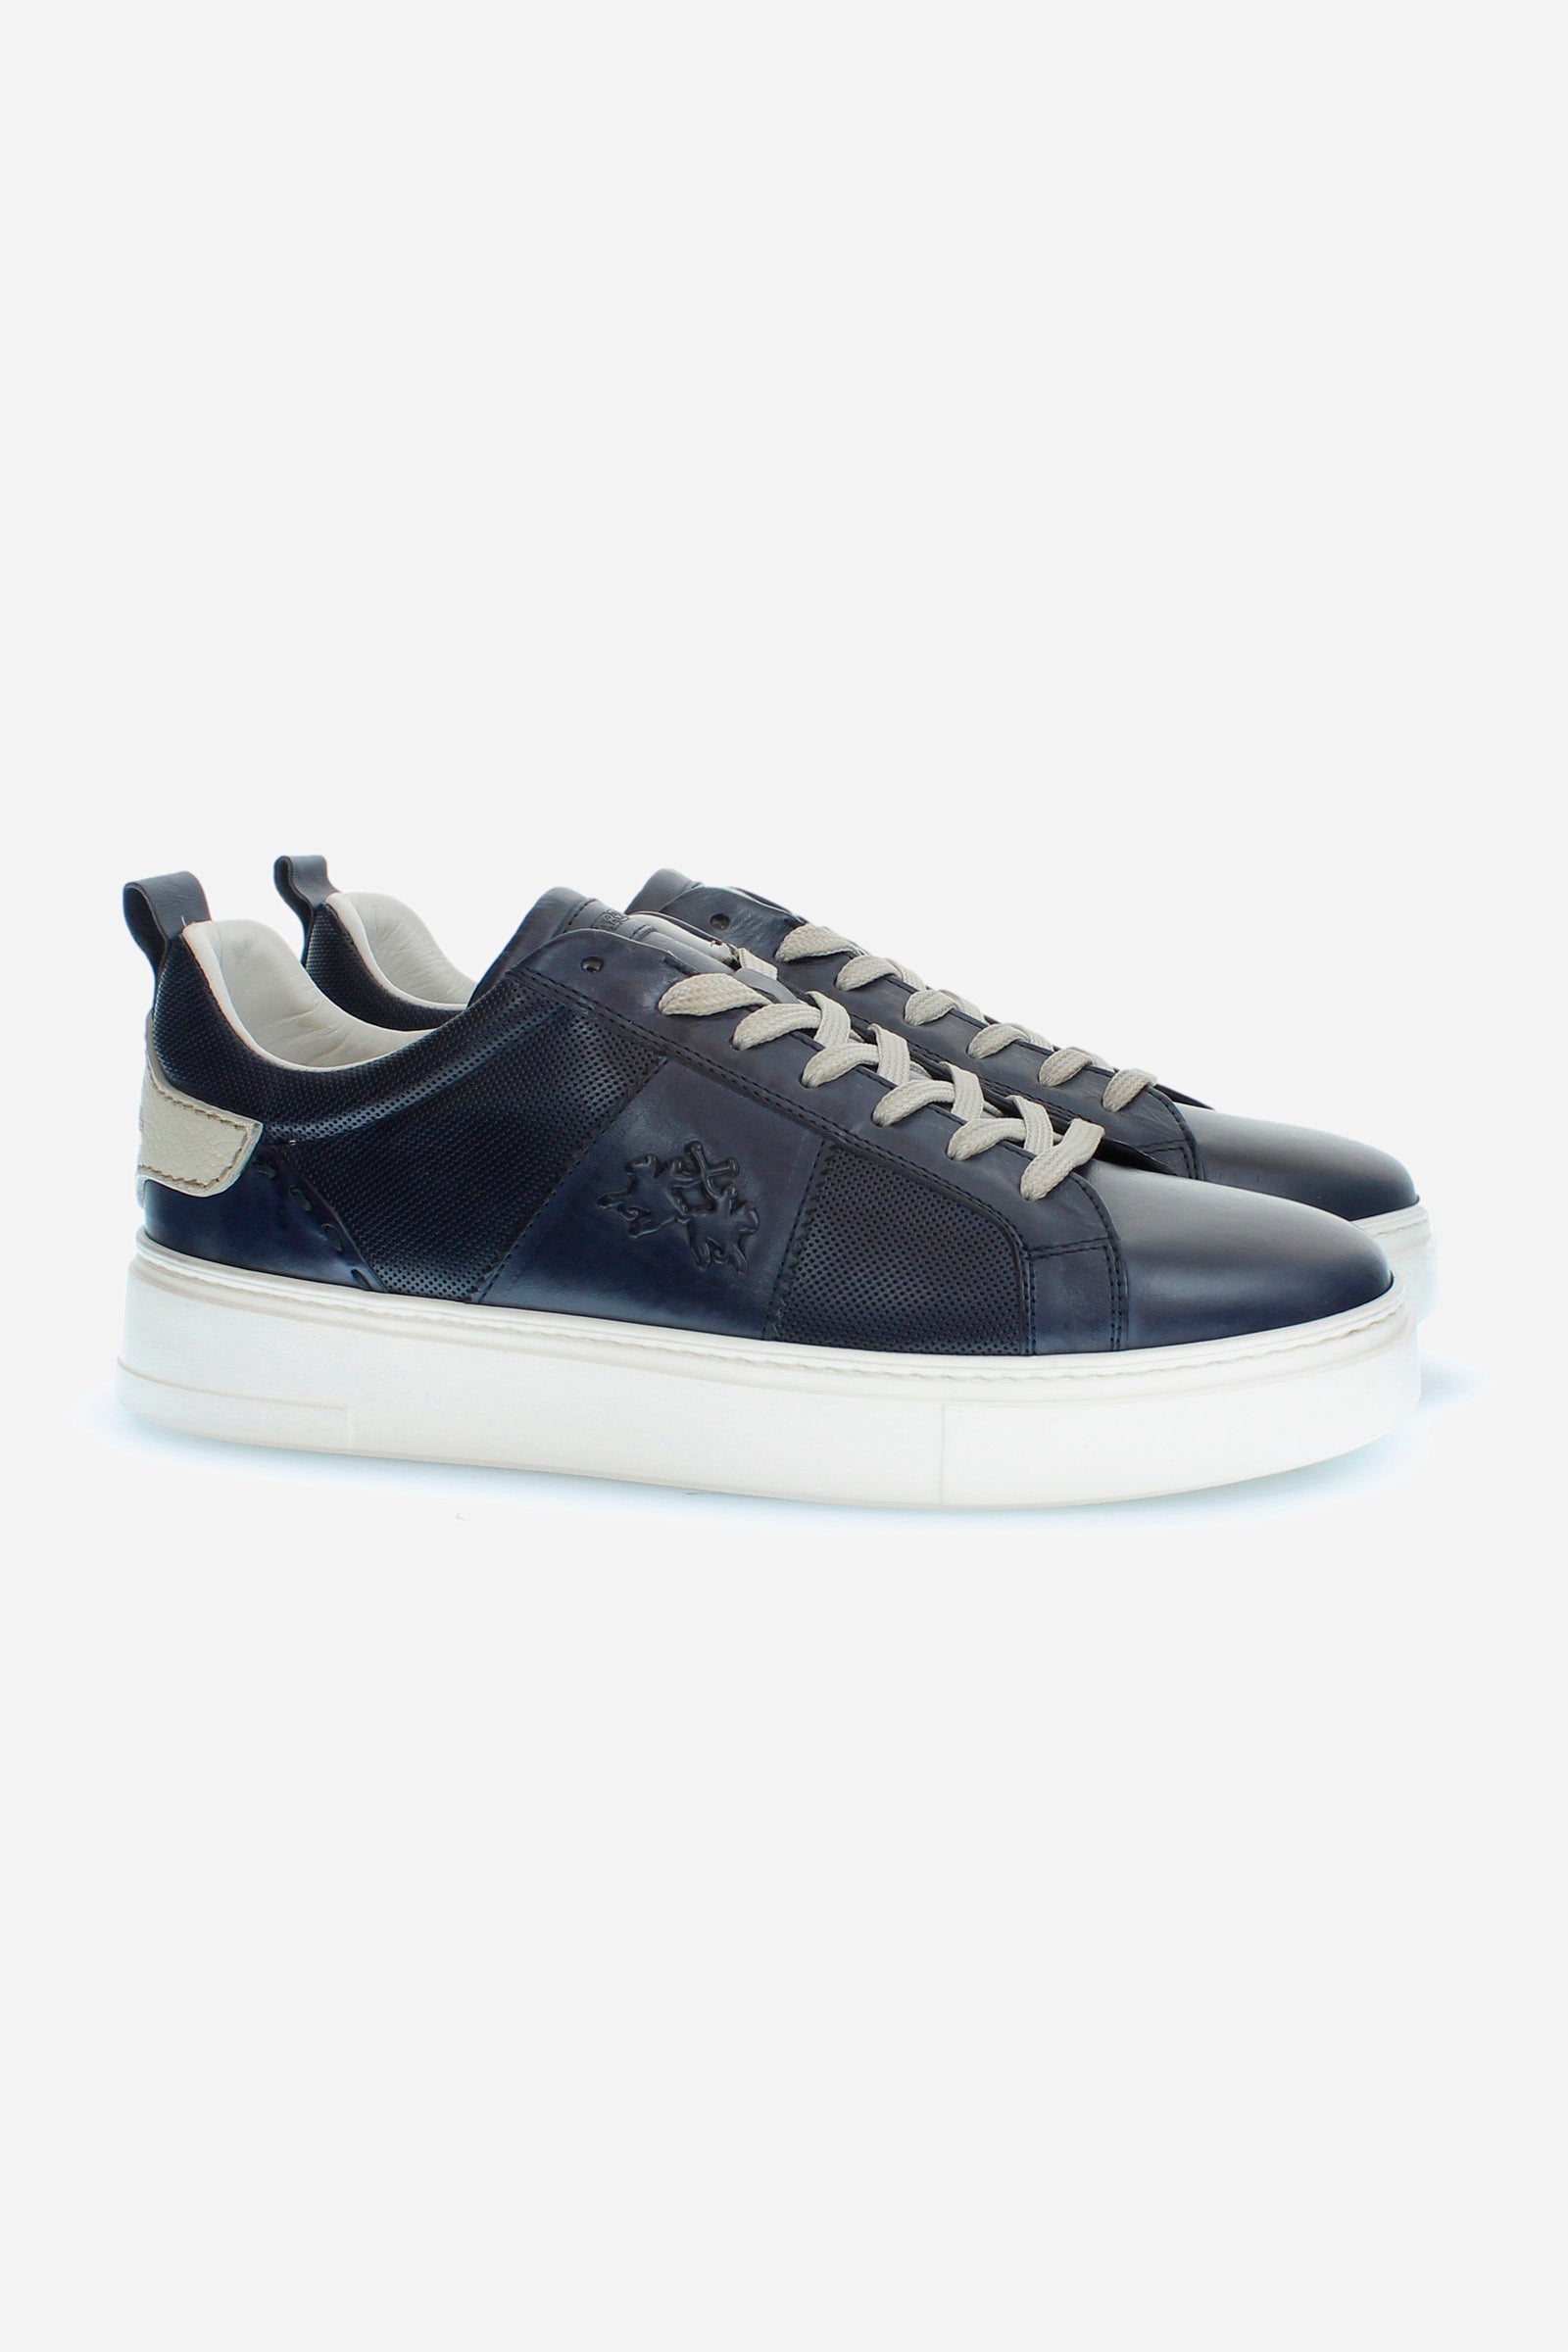 Men's leather trainers with contrasting inserts